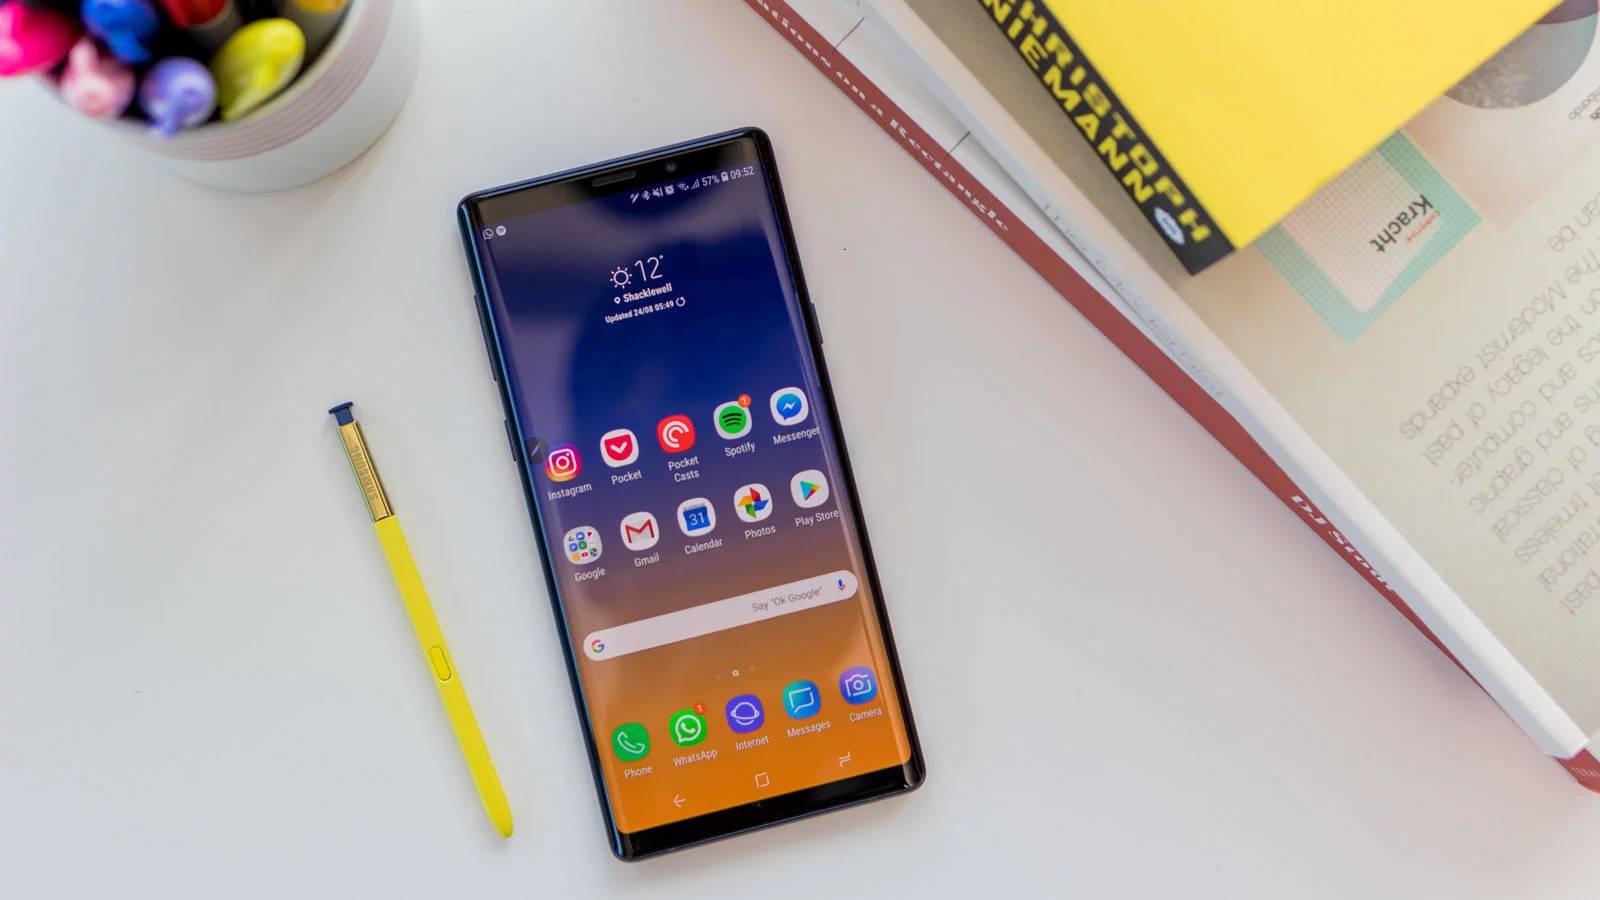 eMAG REDUCERE Samsung GALAXY NOTE 9 1899 lei